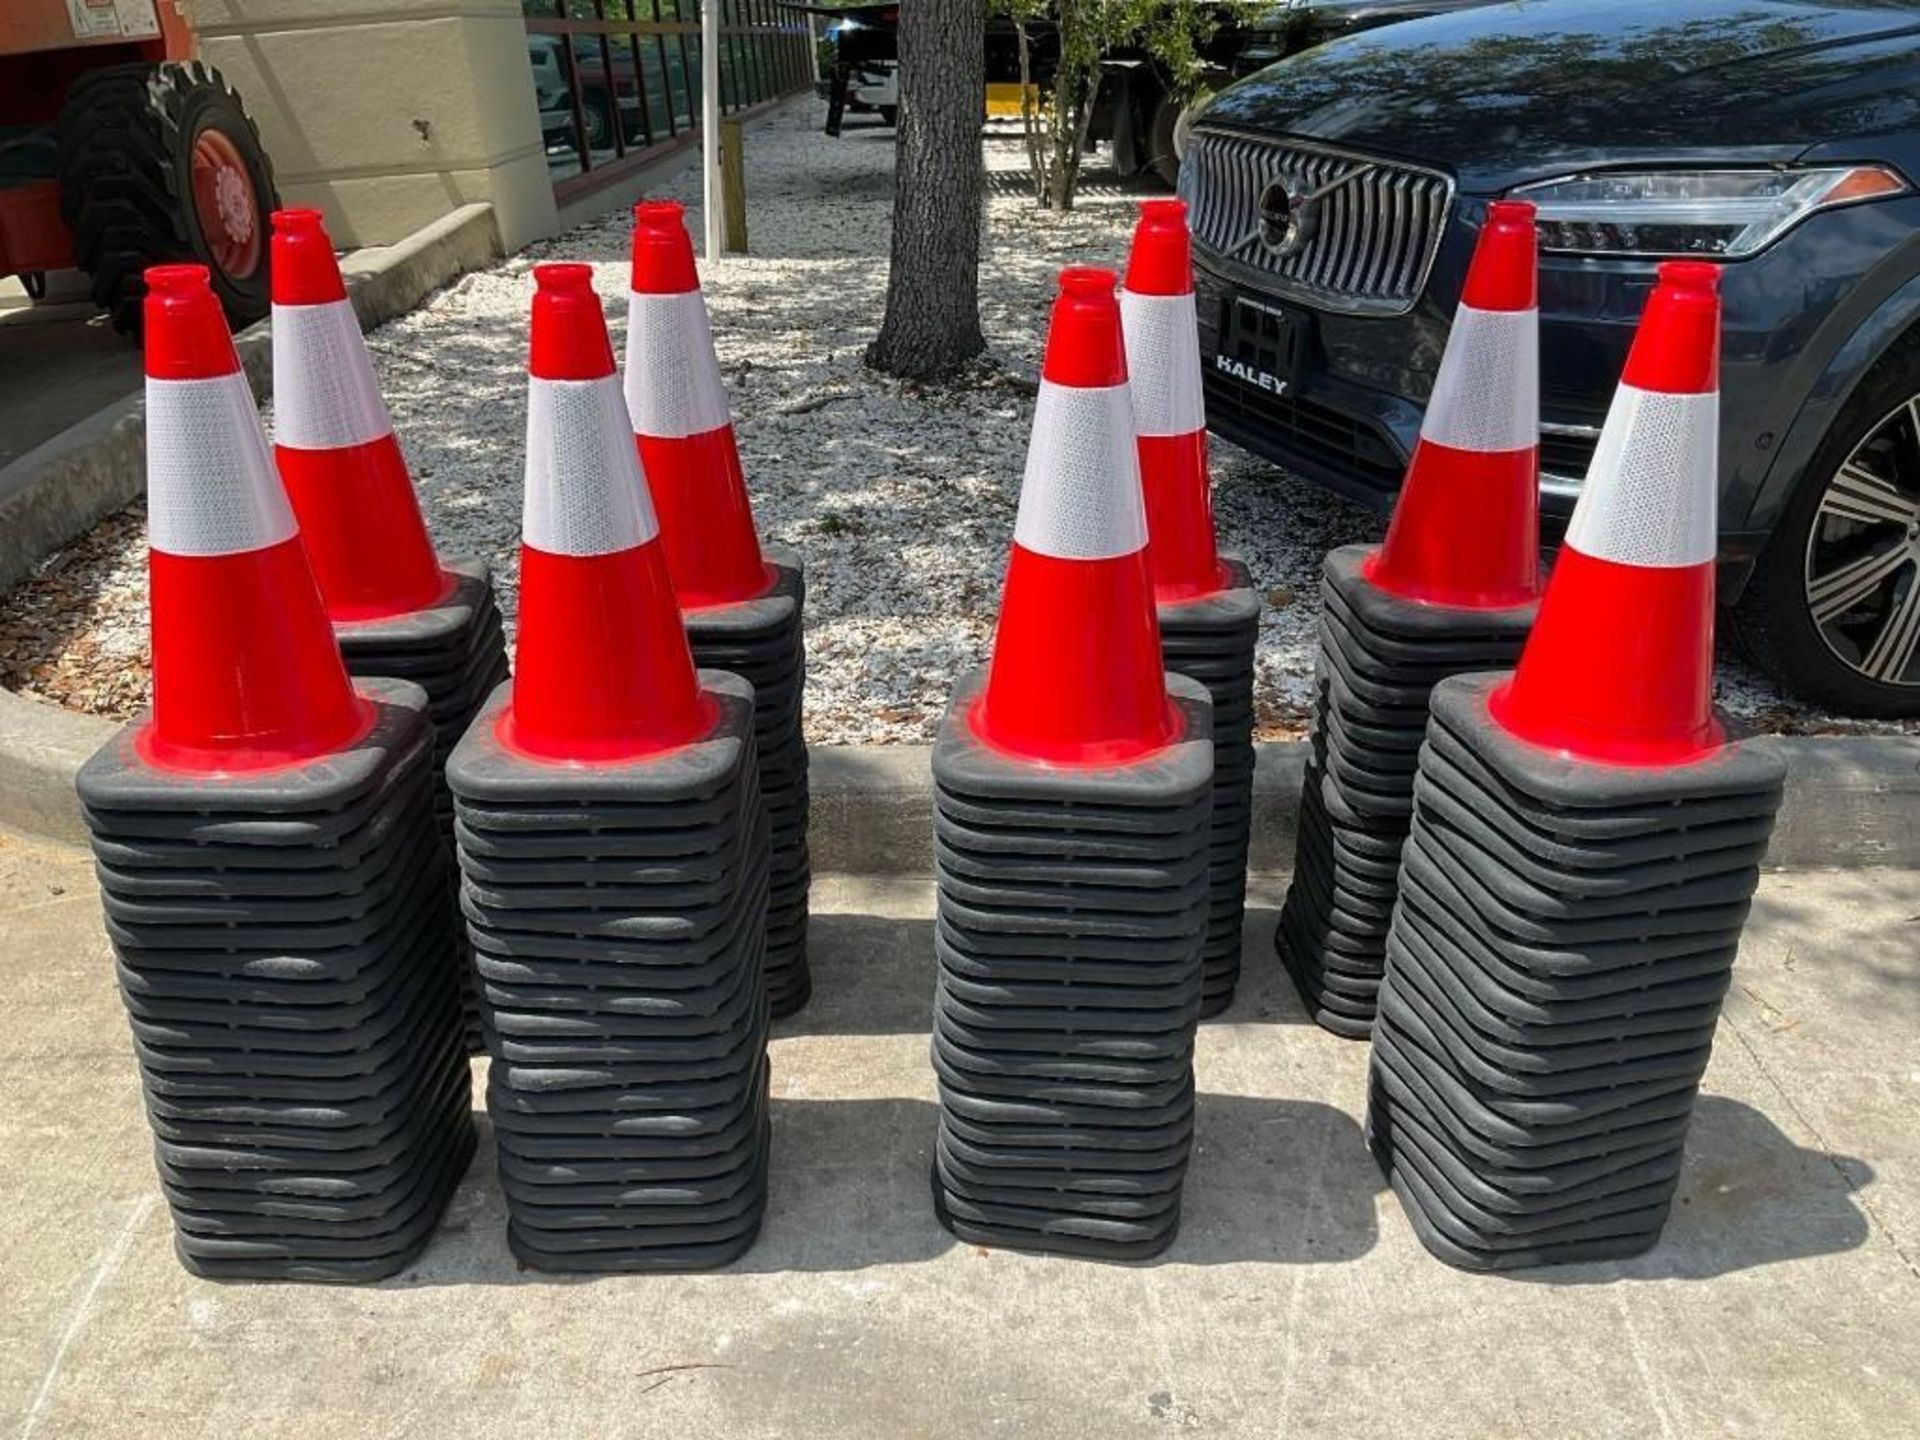 20 SAFETY CONES, 18in TALL - Image 5 of 5